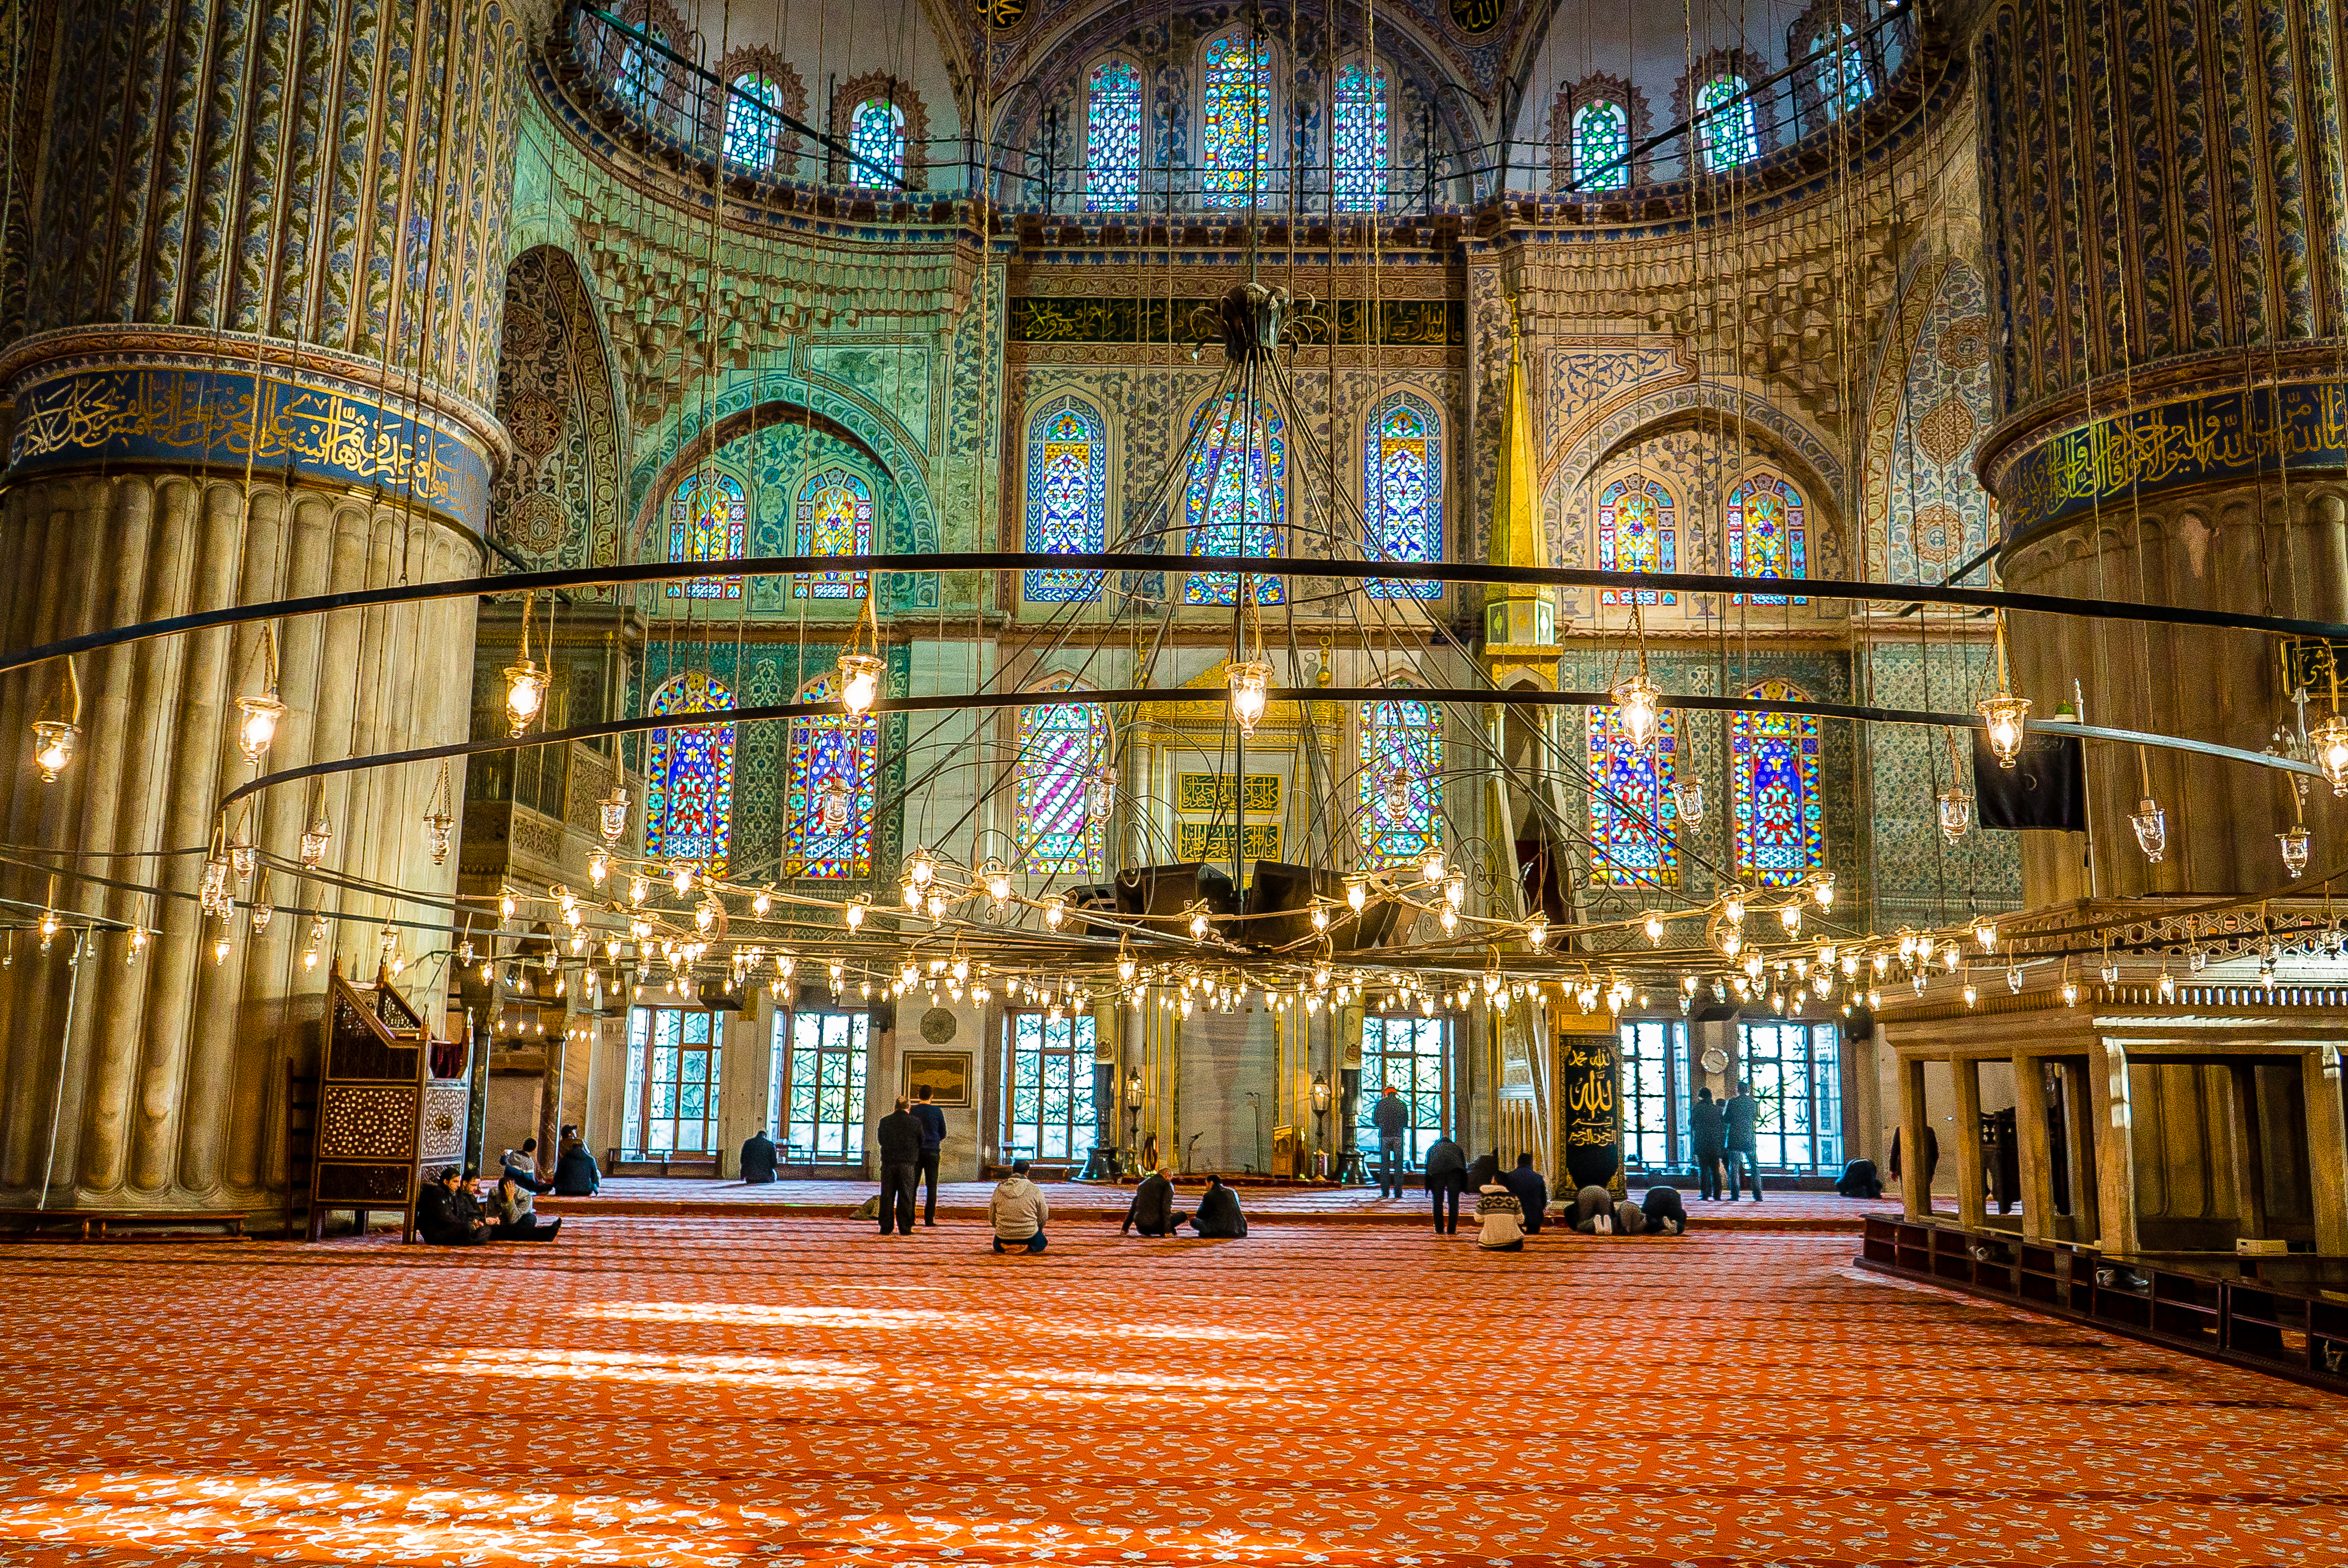 Istanbul’s Beautiful Blue Mosque Interior During Prayer